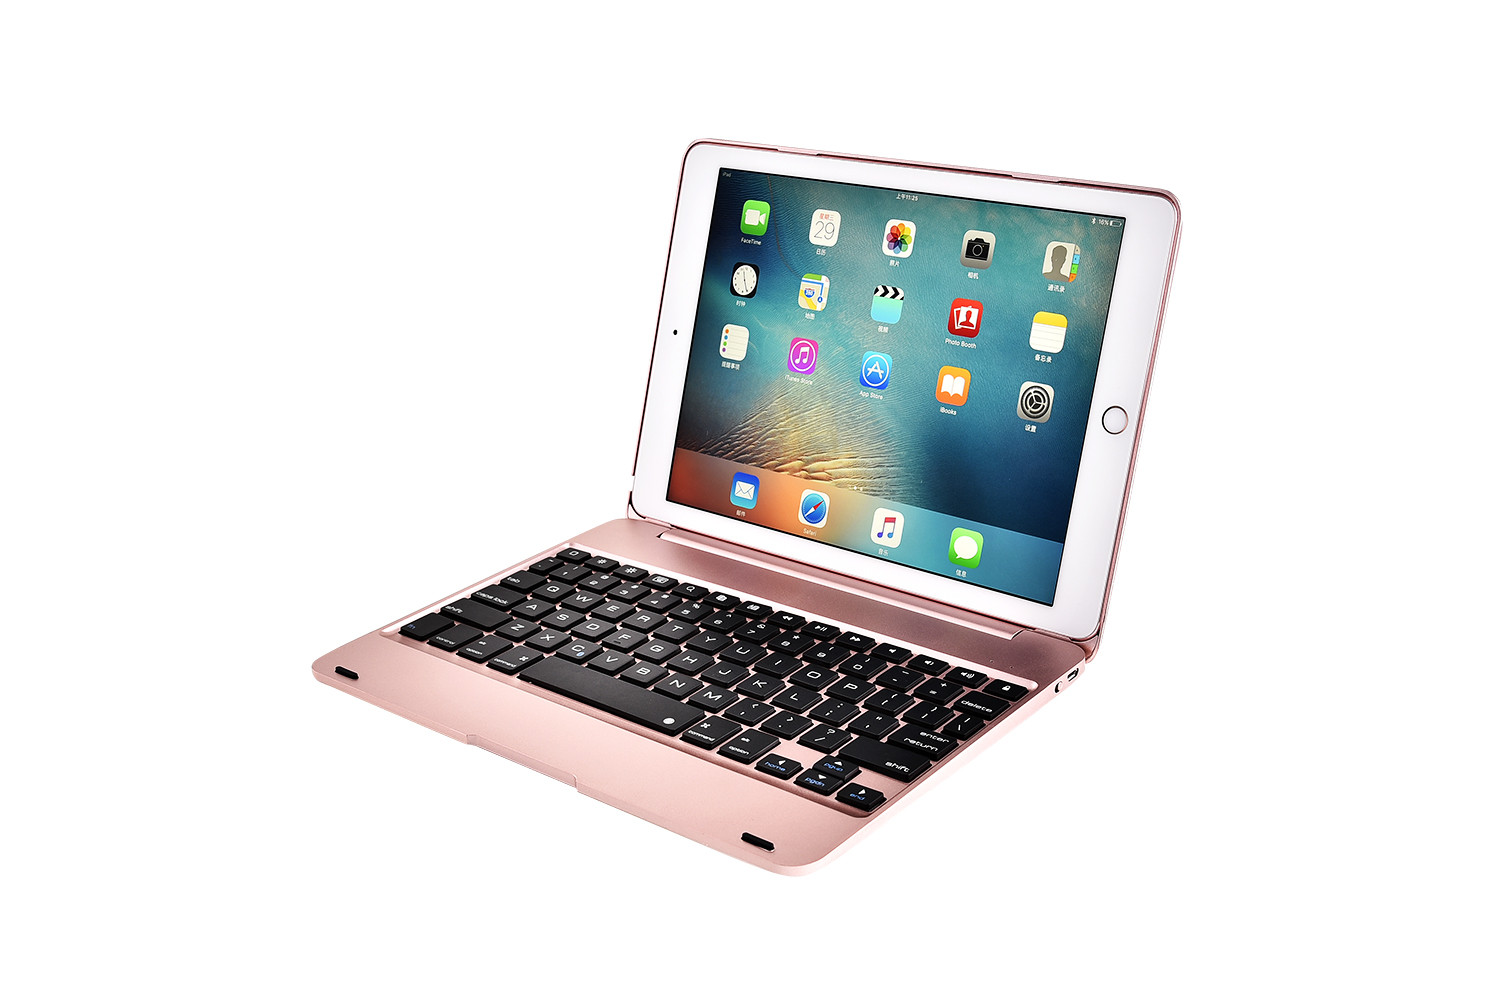 bluetooth Keyboard Foldable Stand Case For iPad Pro 9.7 Inch & iPad Air 2 10